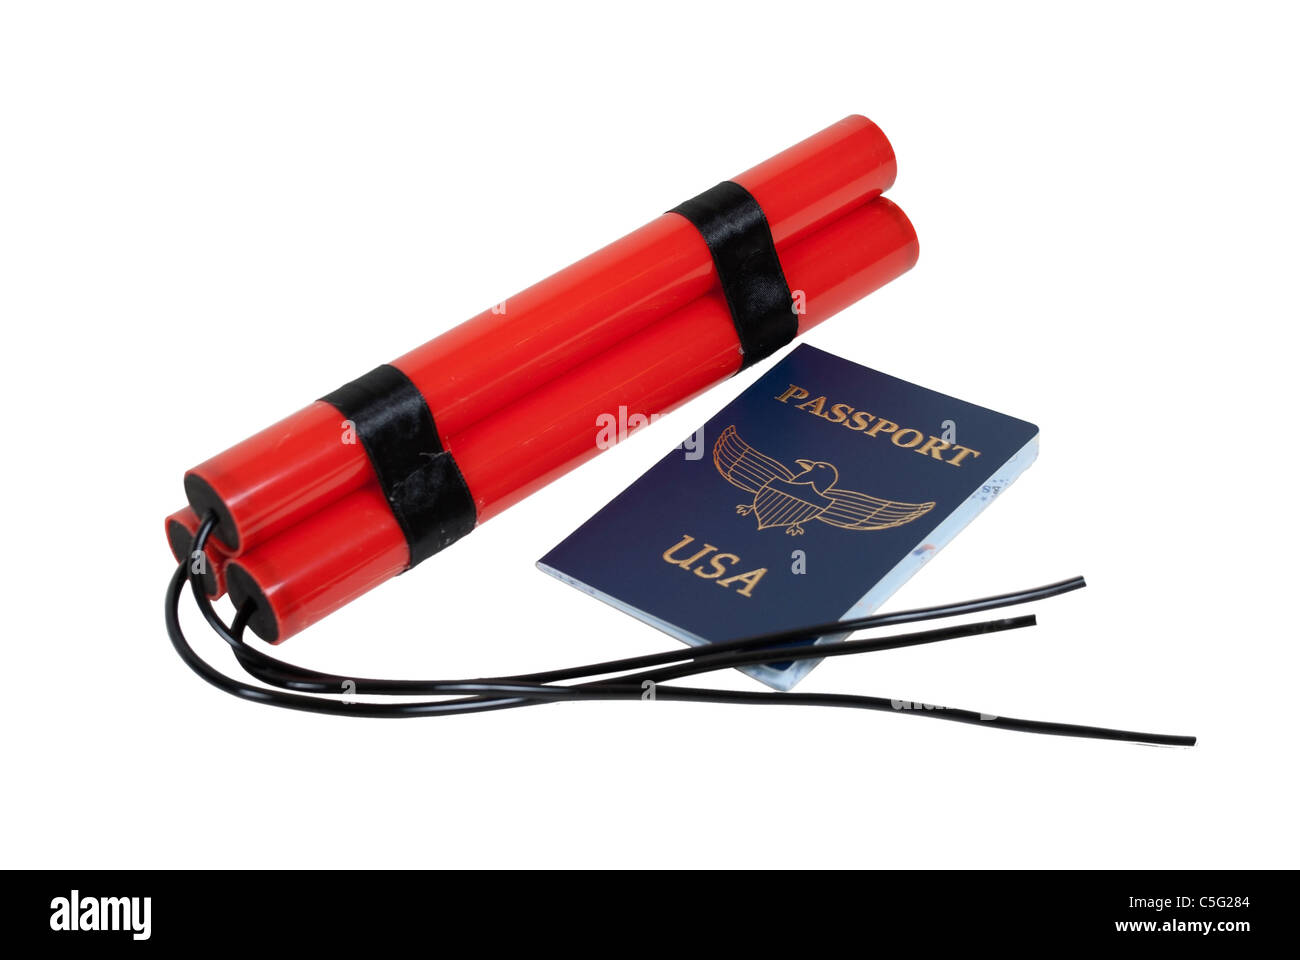 Bundle of red sticks of dynamite with long fuses and a blue passport for travel - path included Stock Photo